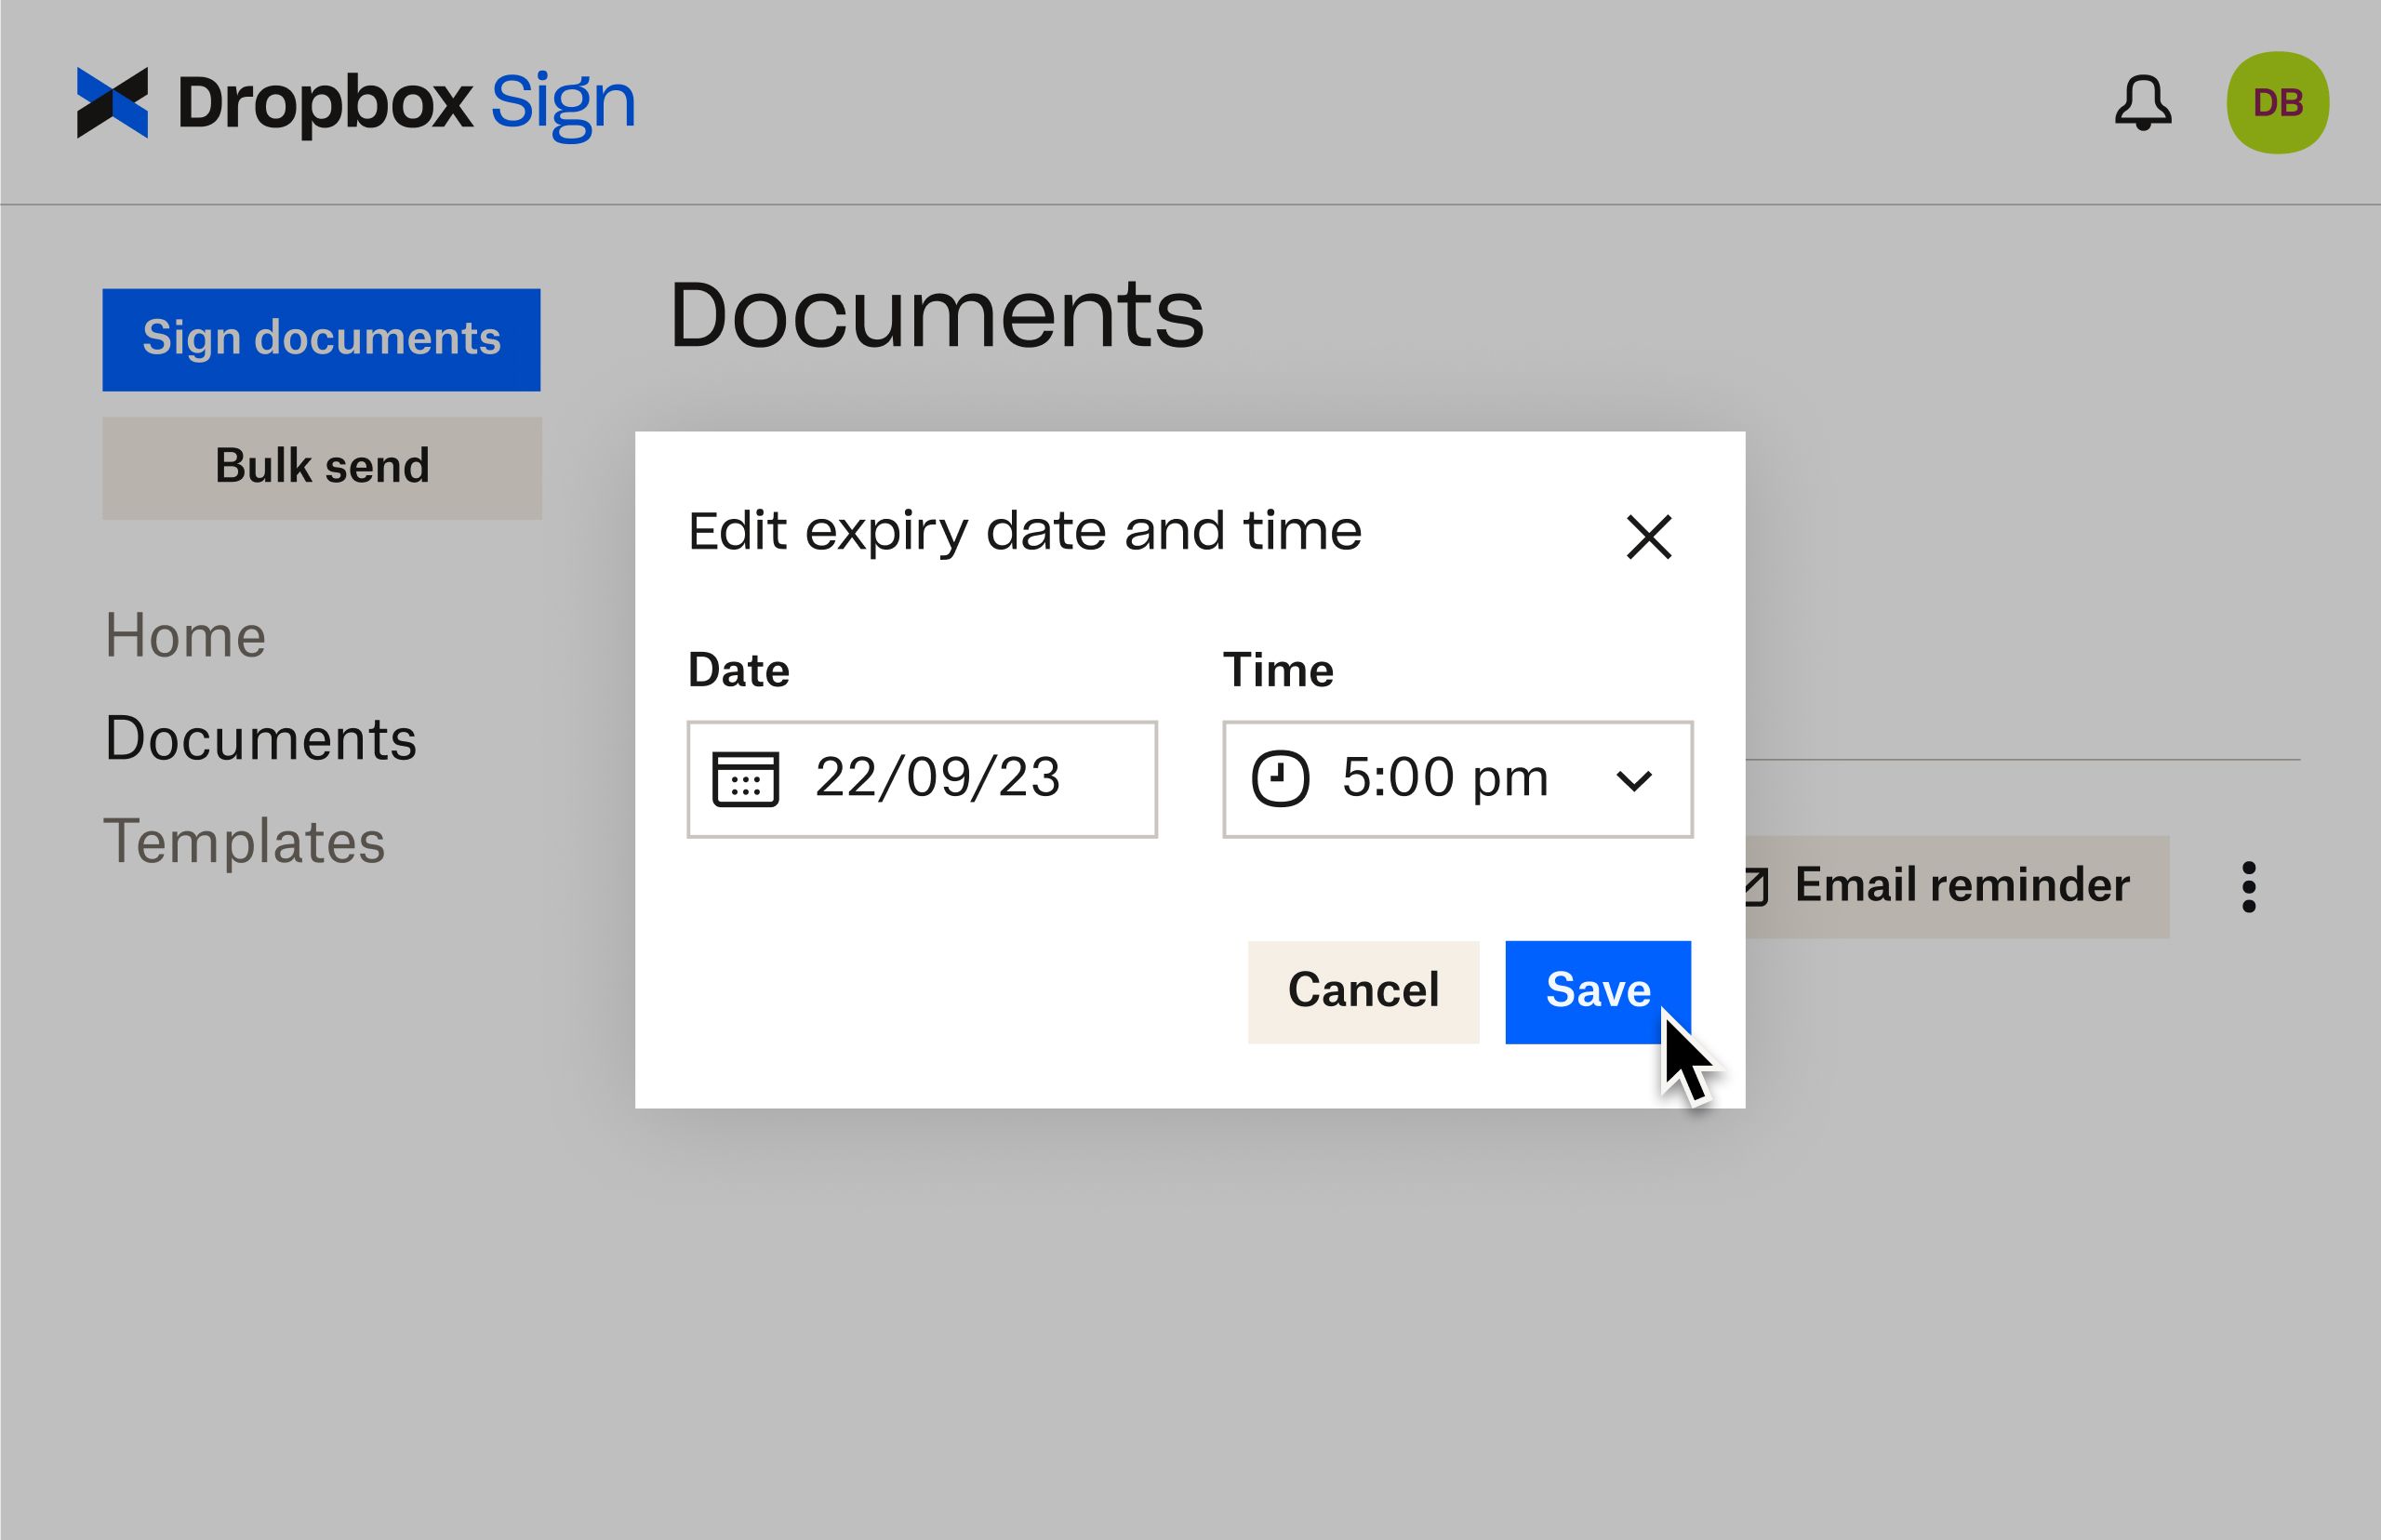 Dropbox Sign UI shows how to edit expiry dates after sending a document for signature